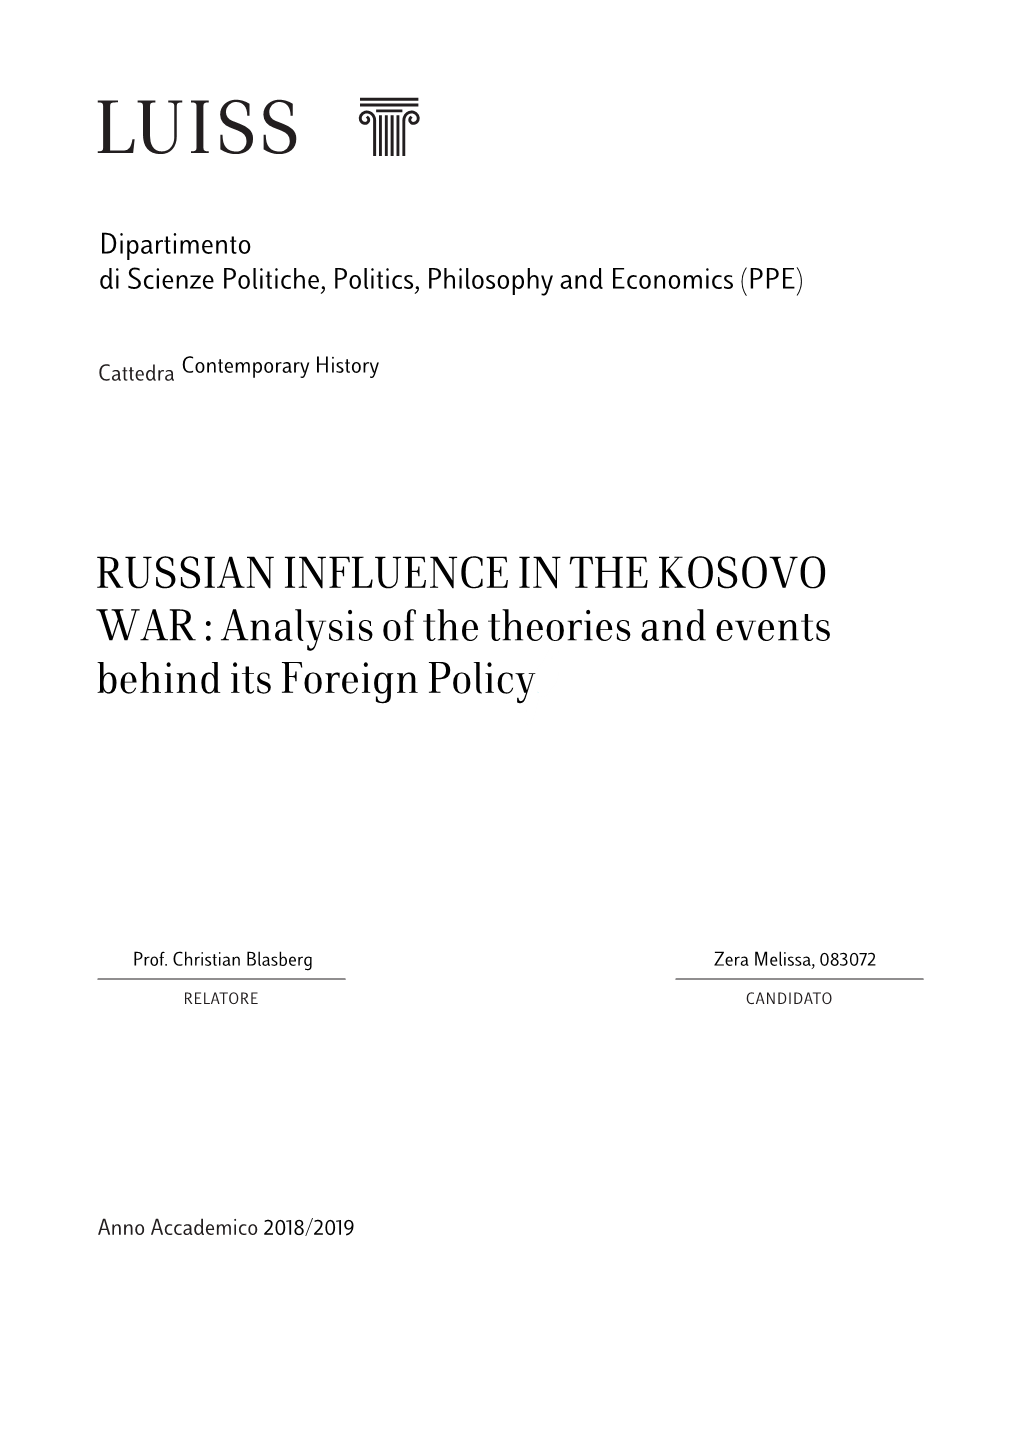 RUSSIAN INFLUENCE in the KOSOVO WAR : Analysis of the Theories and Events Behind Its Foreign Policy